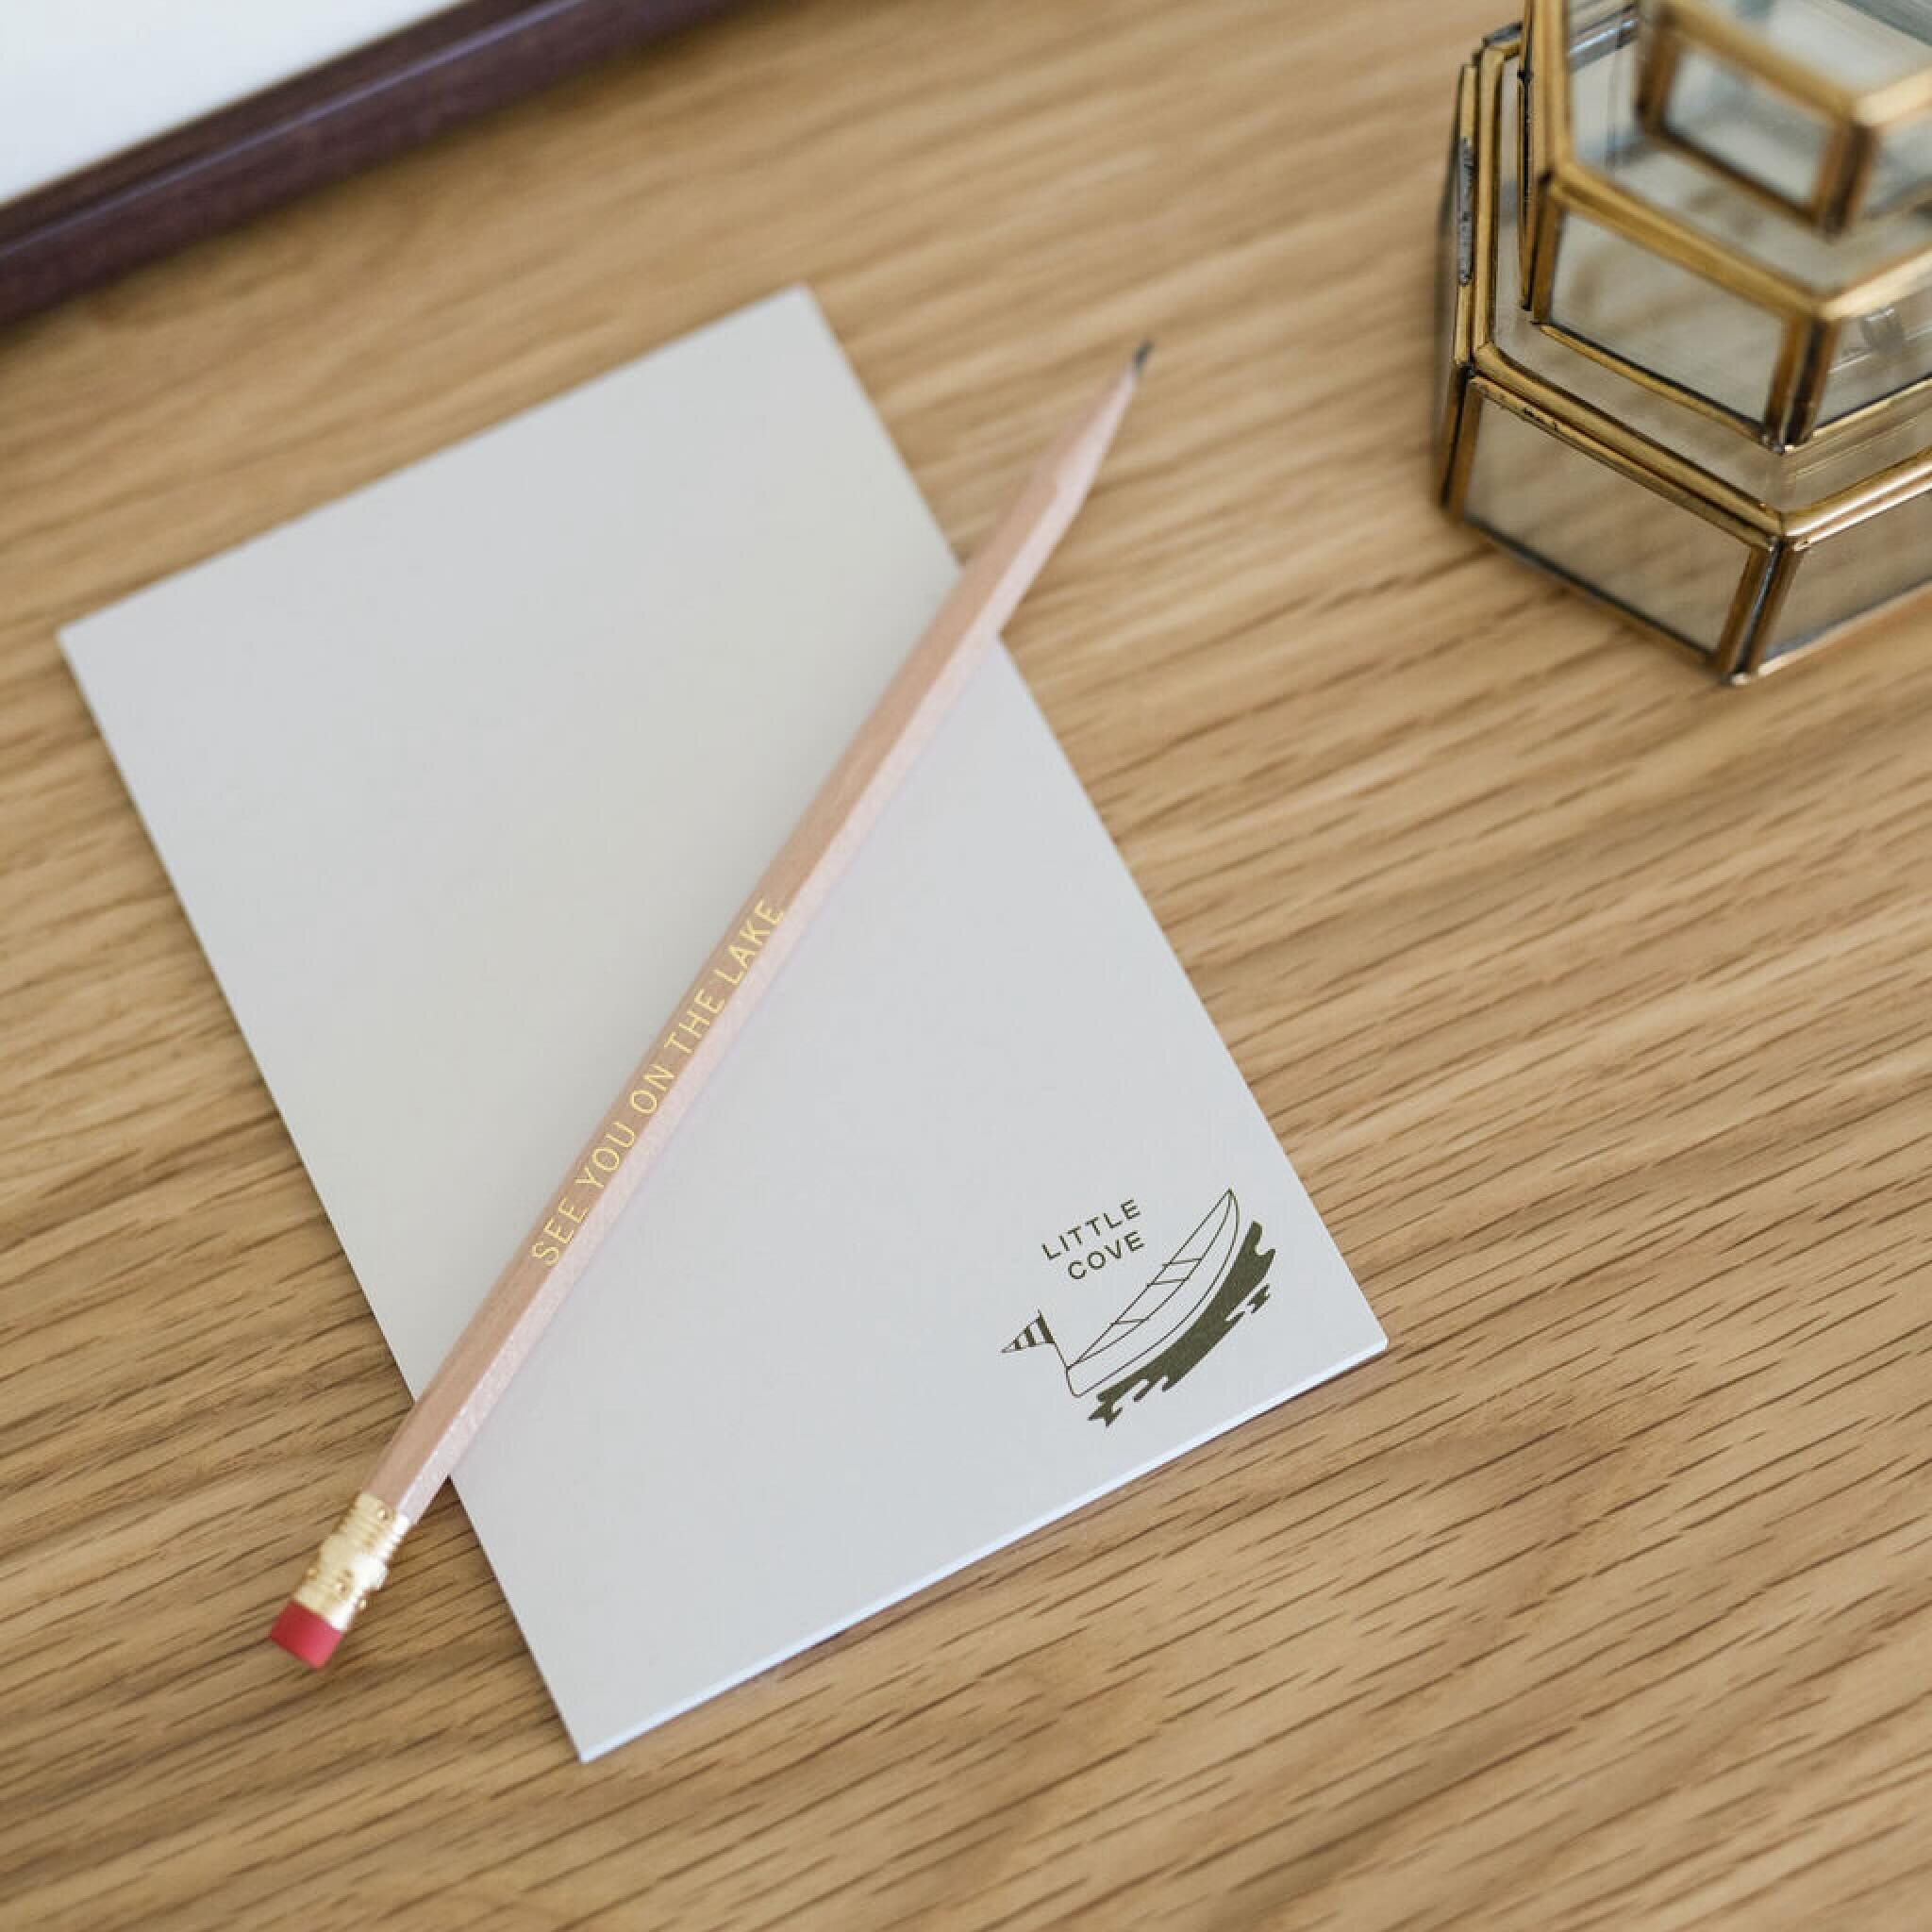 Who else loves a cute hotel notepad?! Forget the mini toiletries&hellip;the notepad is our favorite thing to bring home as a little souvenir from our stay! 📝
Given our love of the hotel notepad, we knew that we just had to have one of our own at Lit